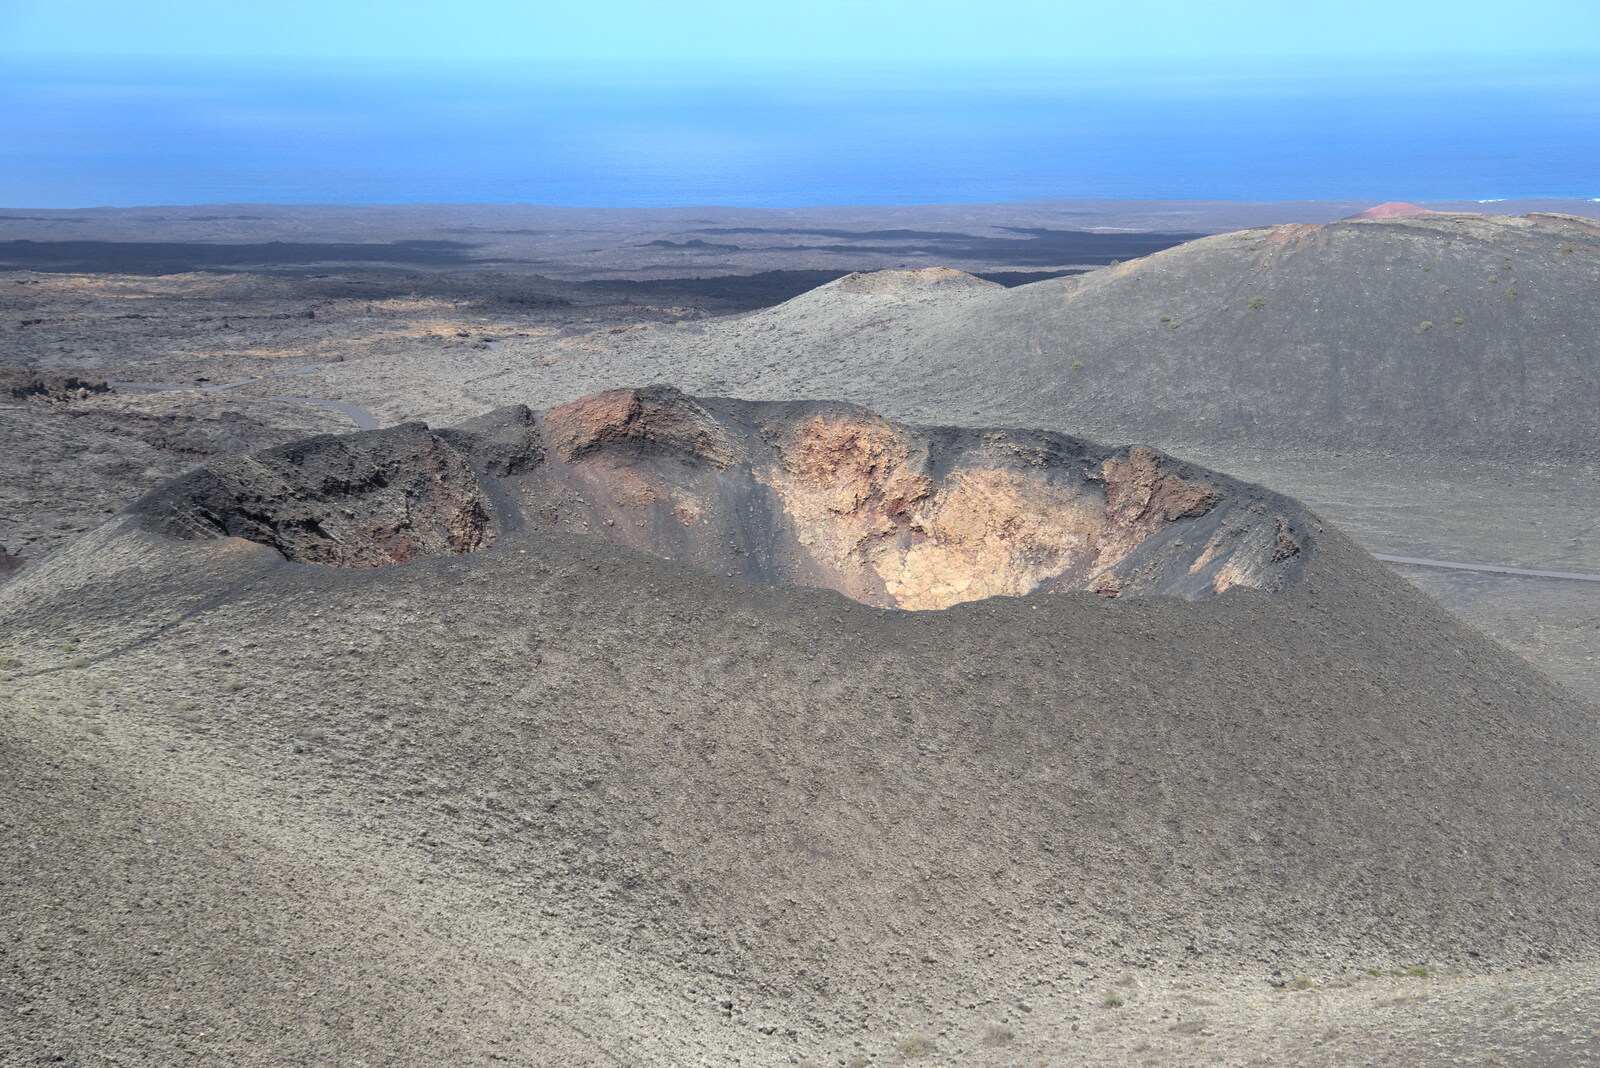 A volcanic crater with its top blown off from The Volcanoes of Lanzarote, Canary Islands, Spain - 27th October 2021